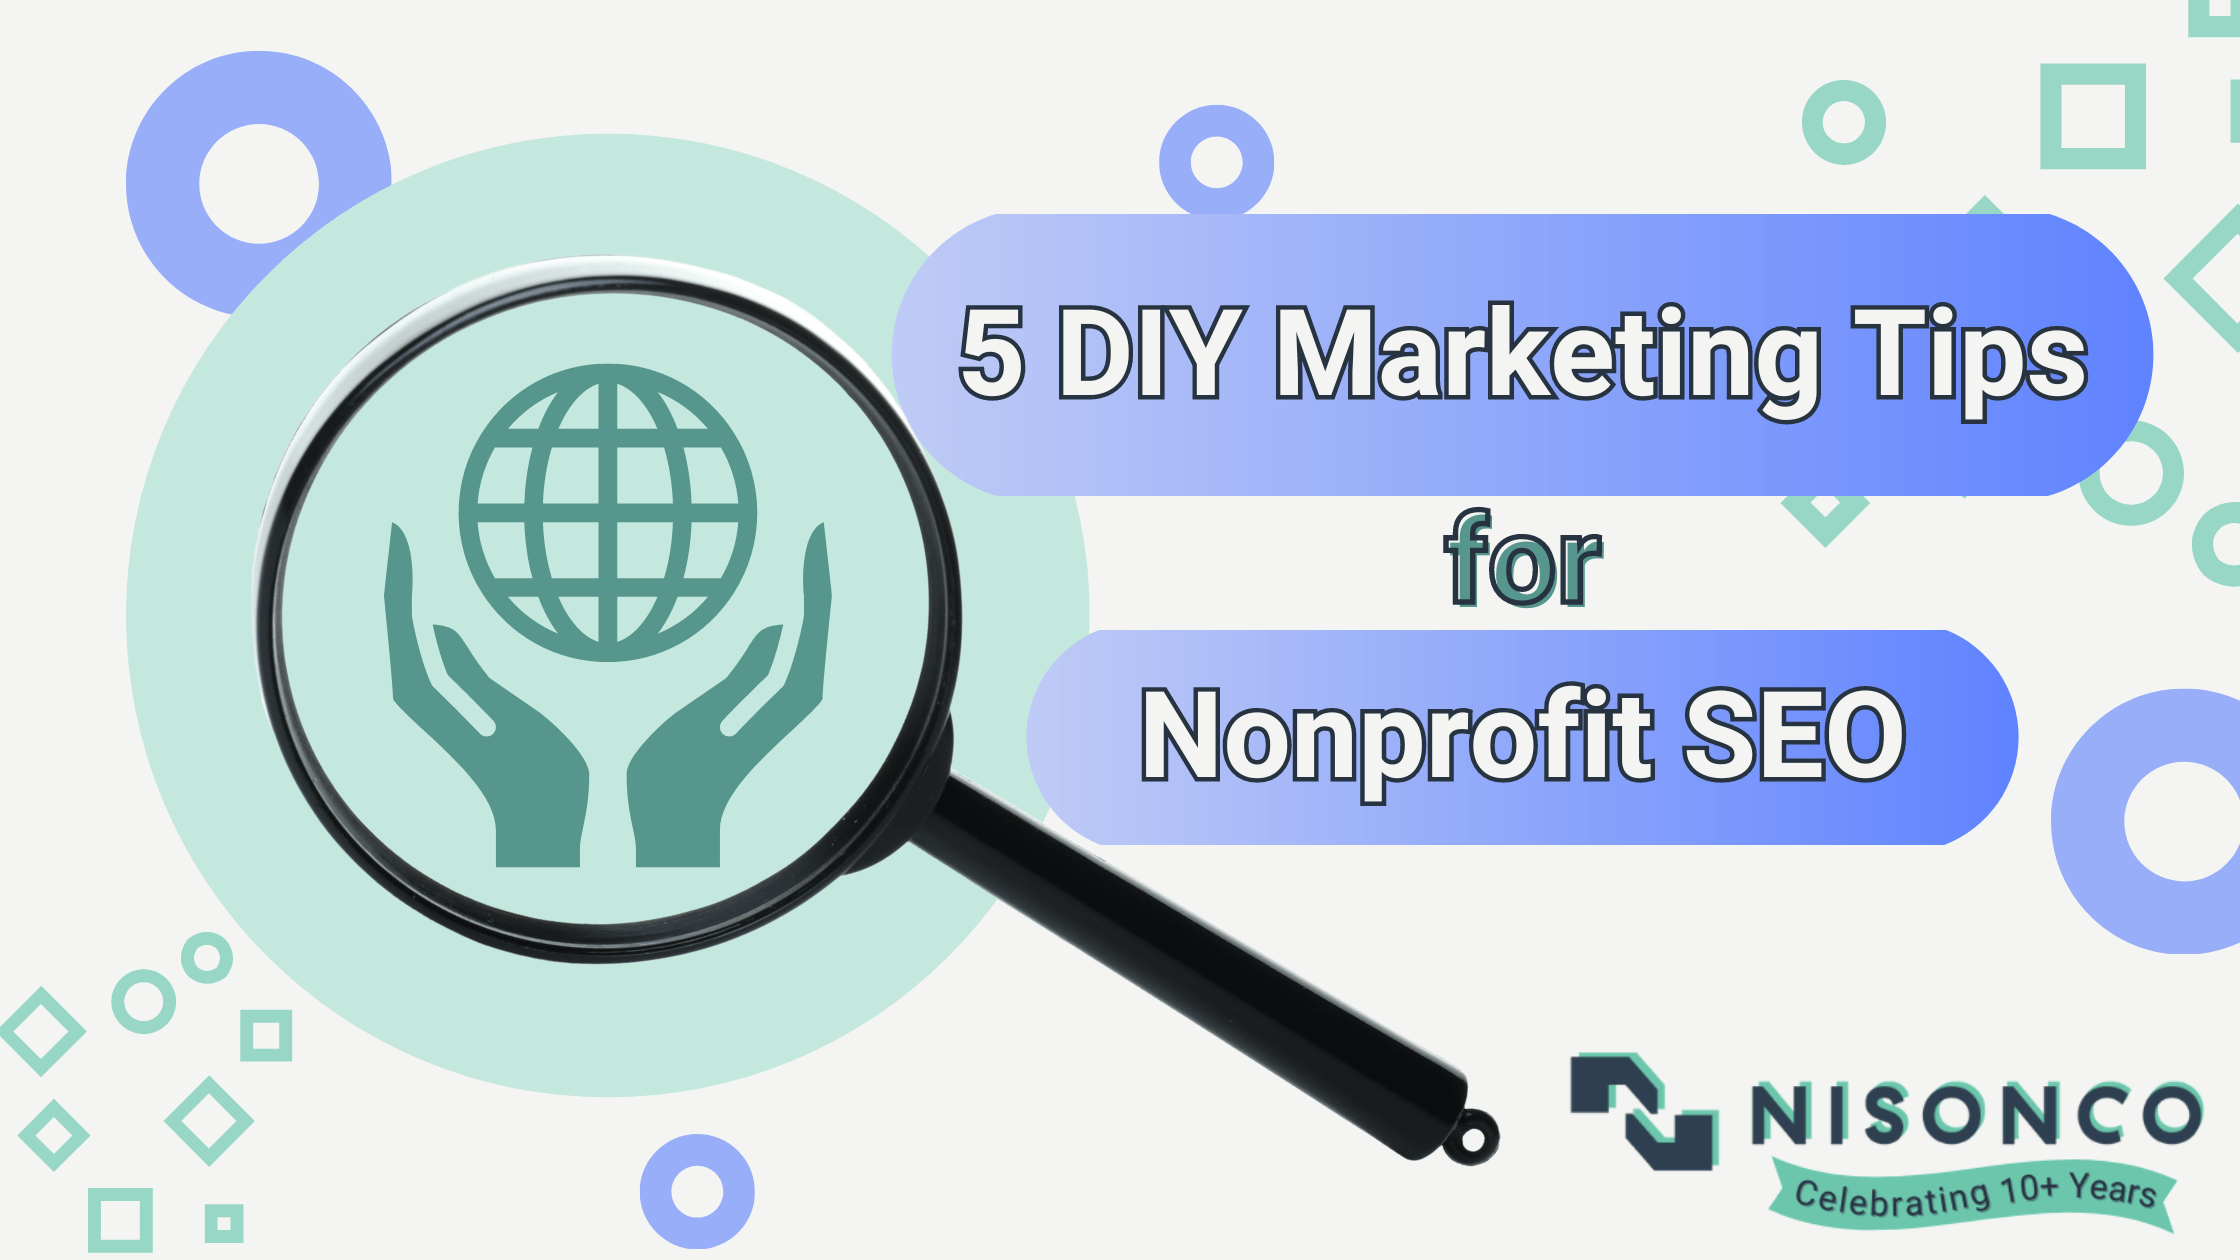 The text '5 DIY Marketing Tips for Nonprofit SEO' is to the right of a magnifying glass with an illustration of a pair of hands holding the earth up in the lens.